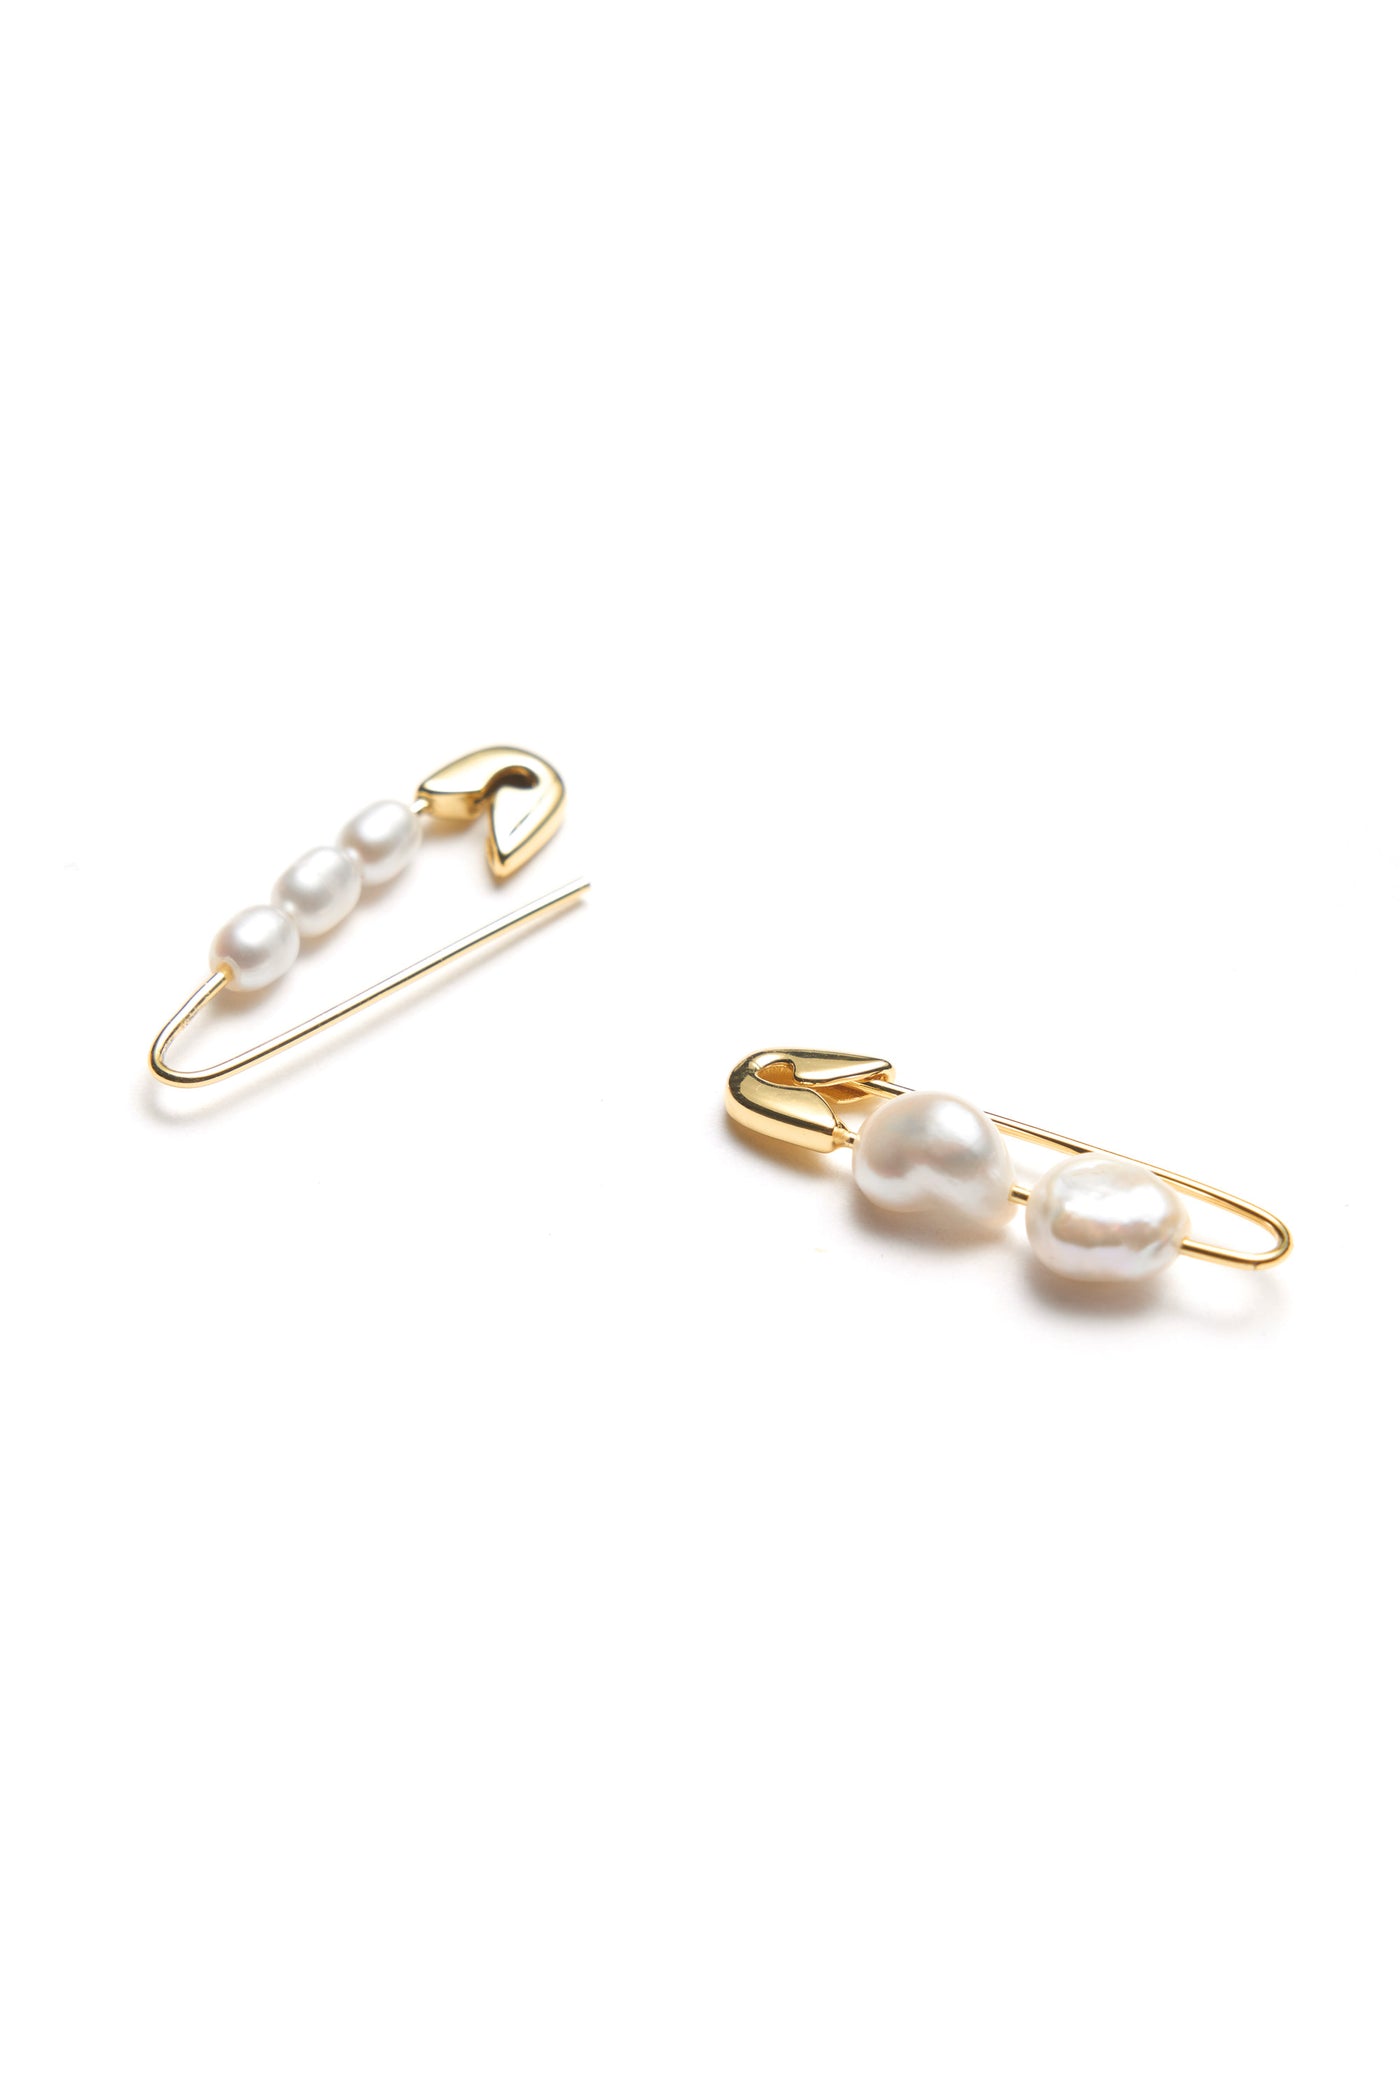 Bianca Mavrick Jewellery Safety Pin Earrings Gold Mismatched Pearls Side View